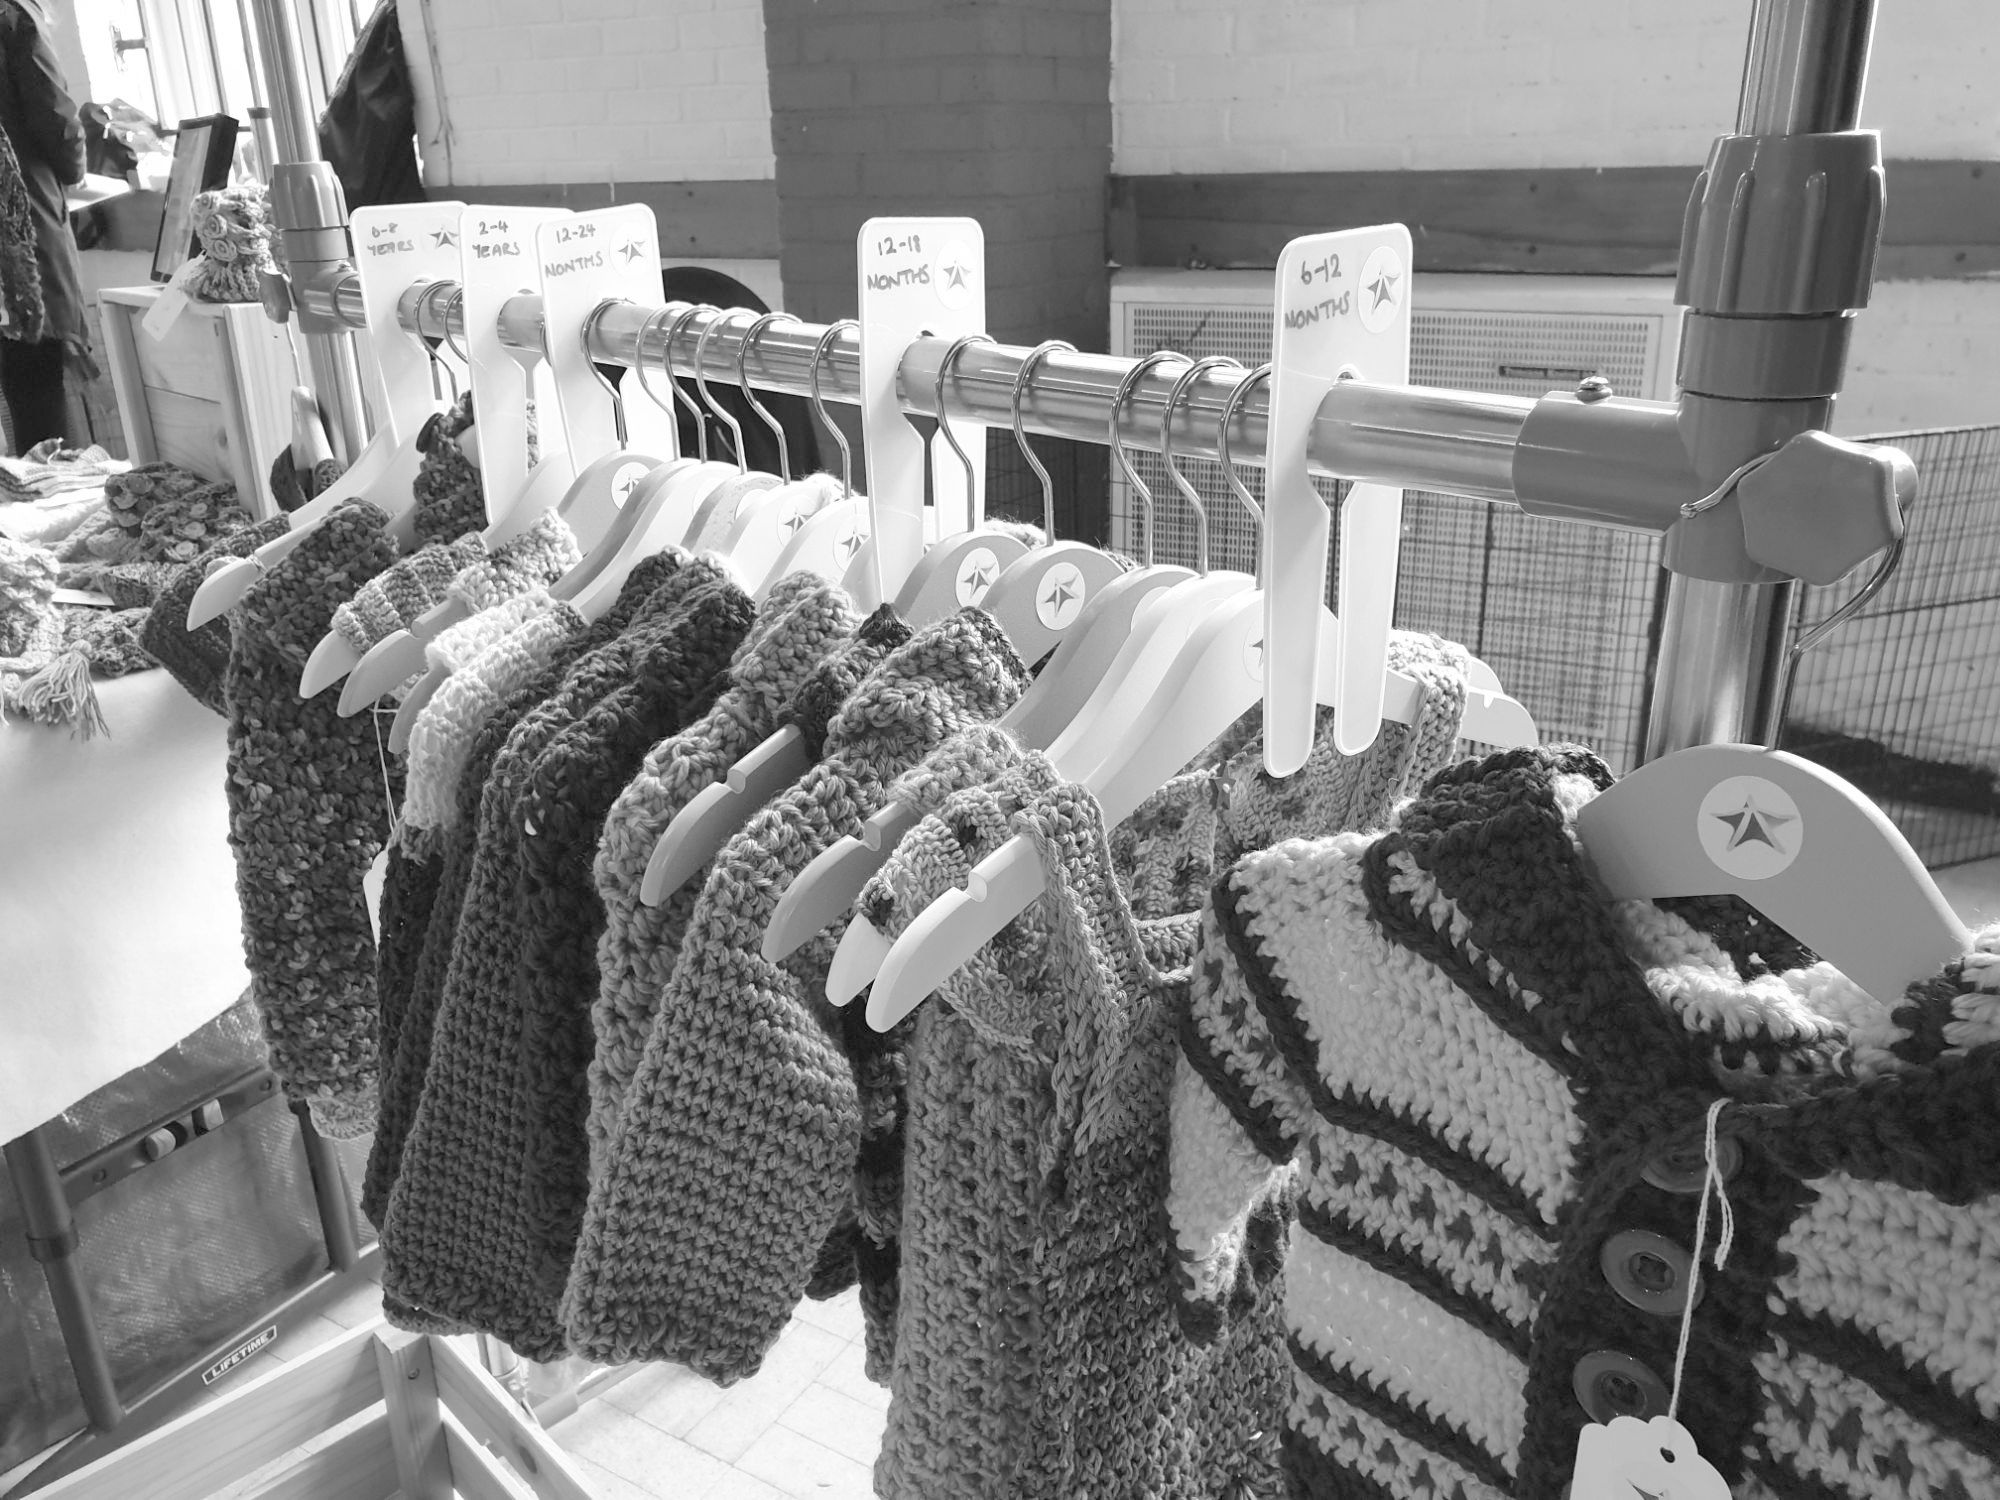 A clothes rail full of crocheted clothes.